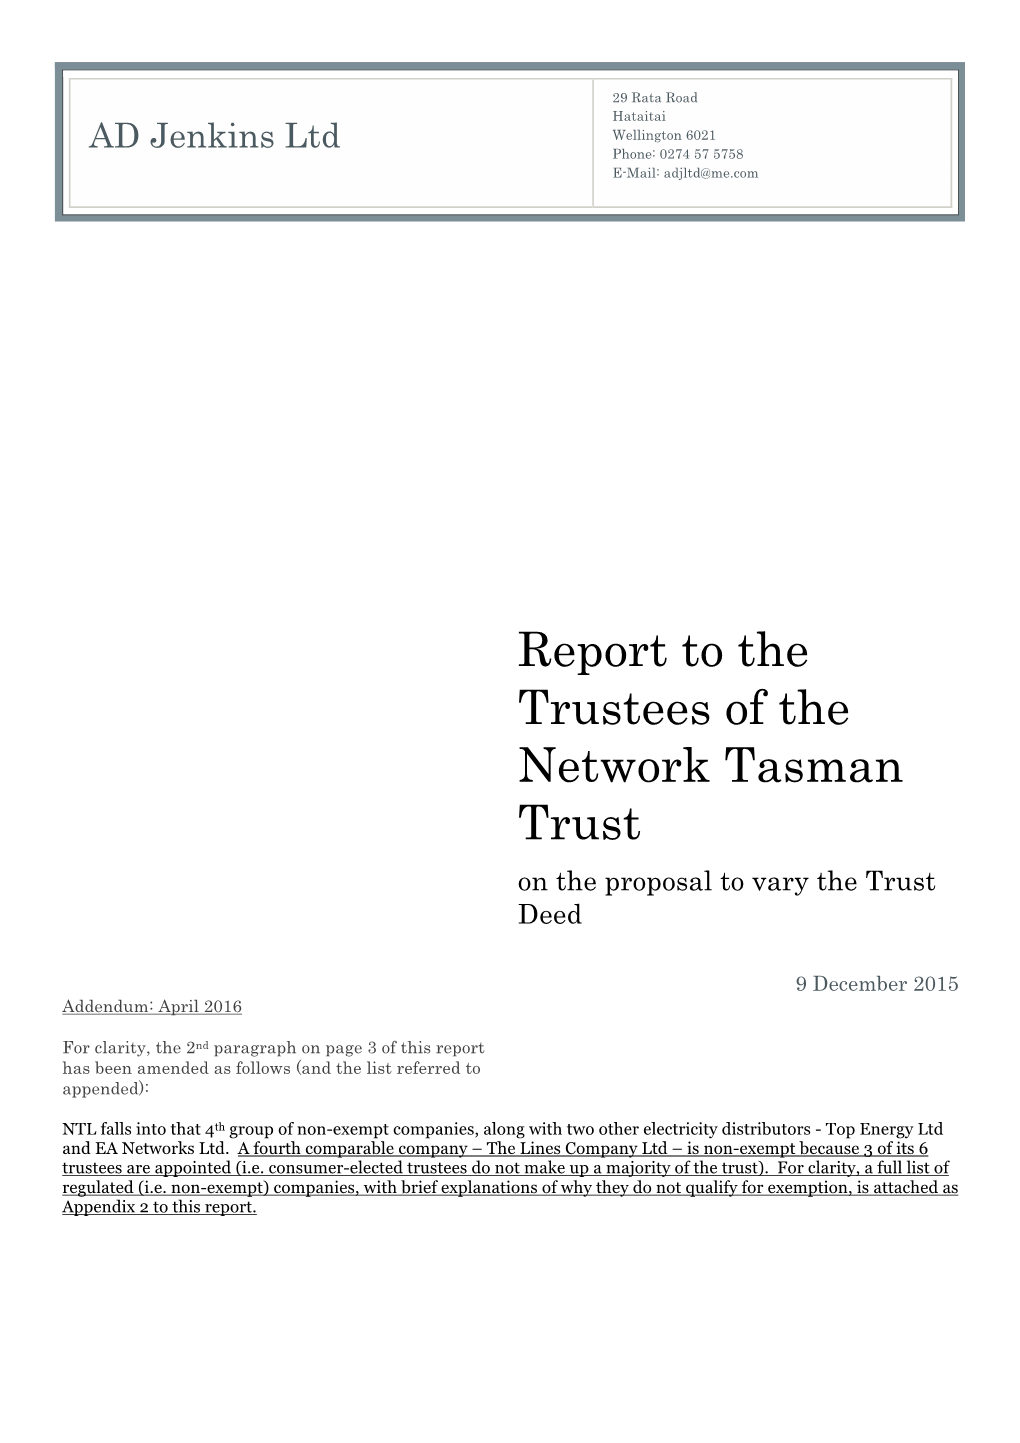 Report to the Trustees of the Network Tasman Trust on the Proposal to Vary the Trust Deed